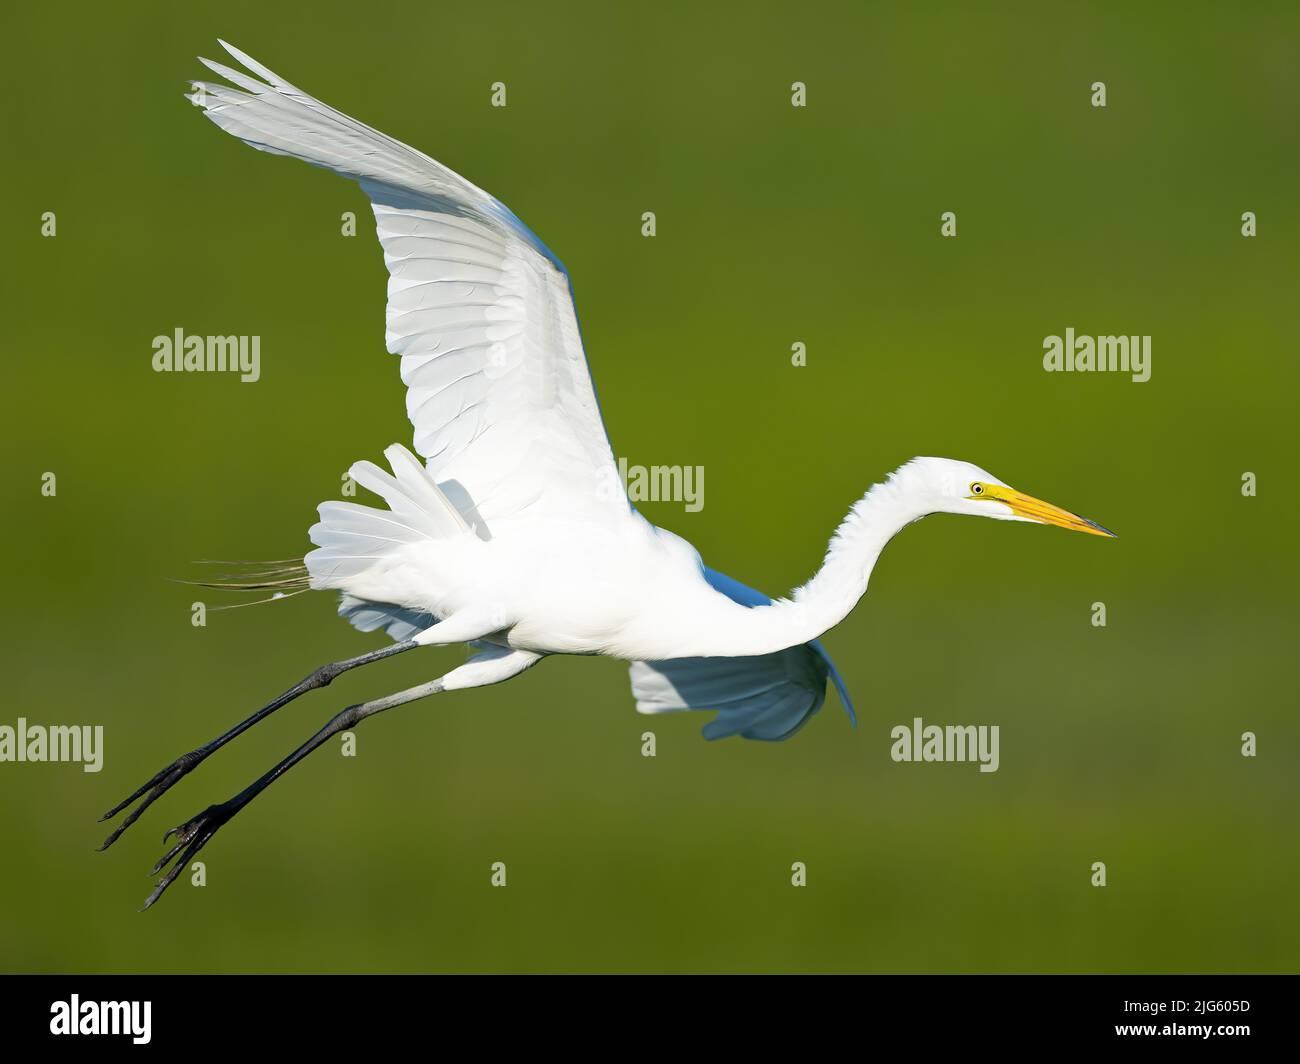 A Great Egret in Flight Stretched Out Stock Photo